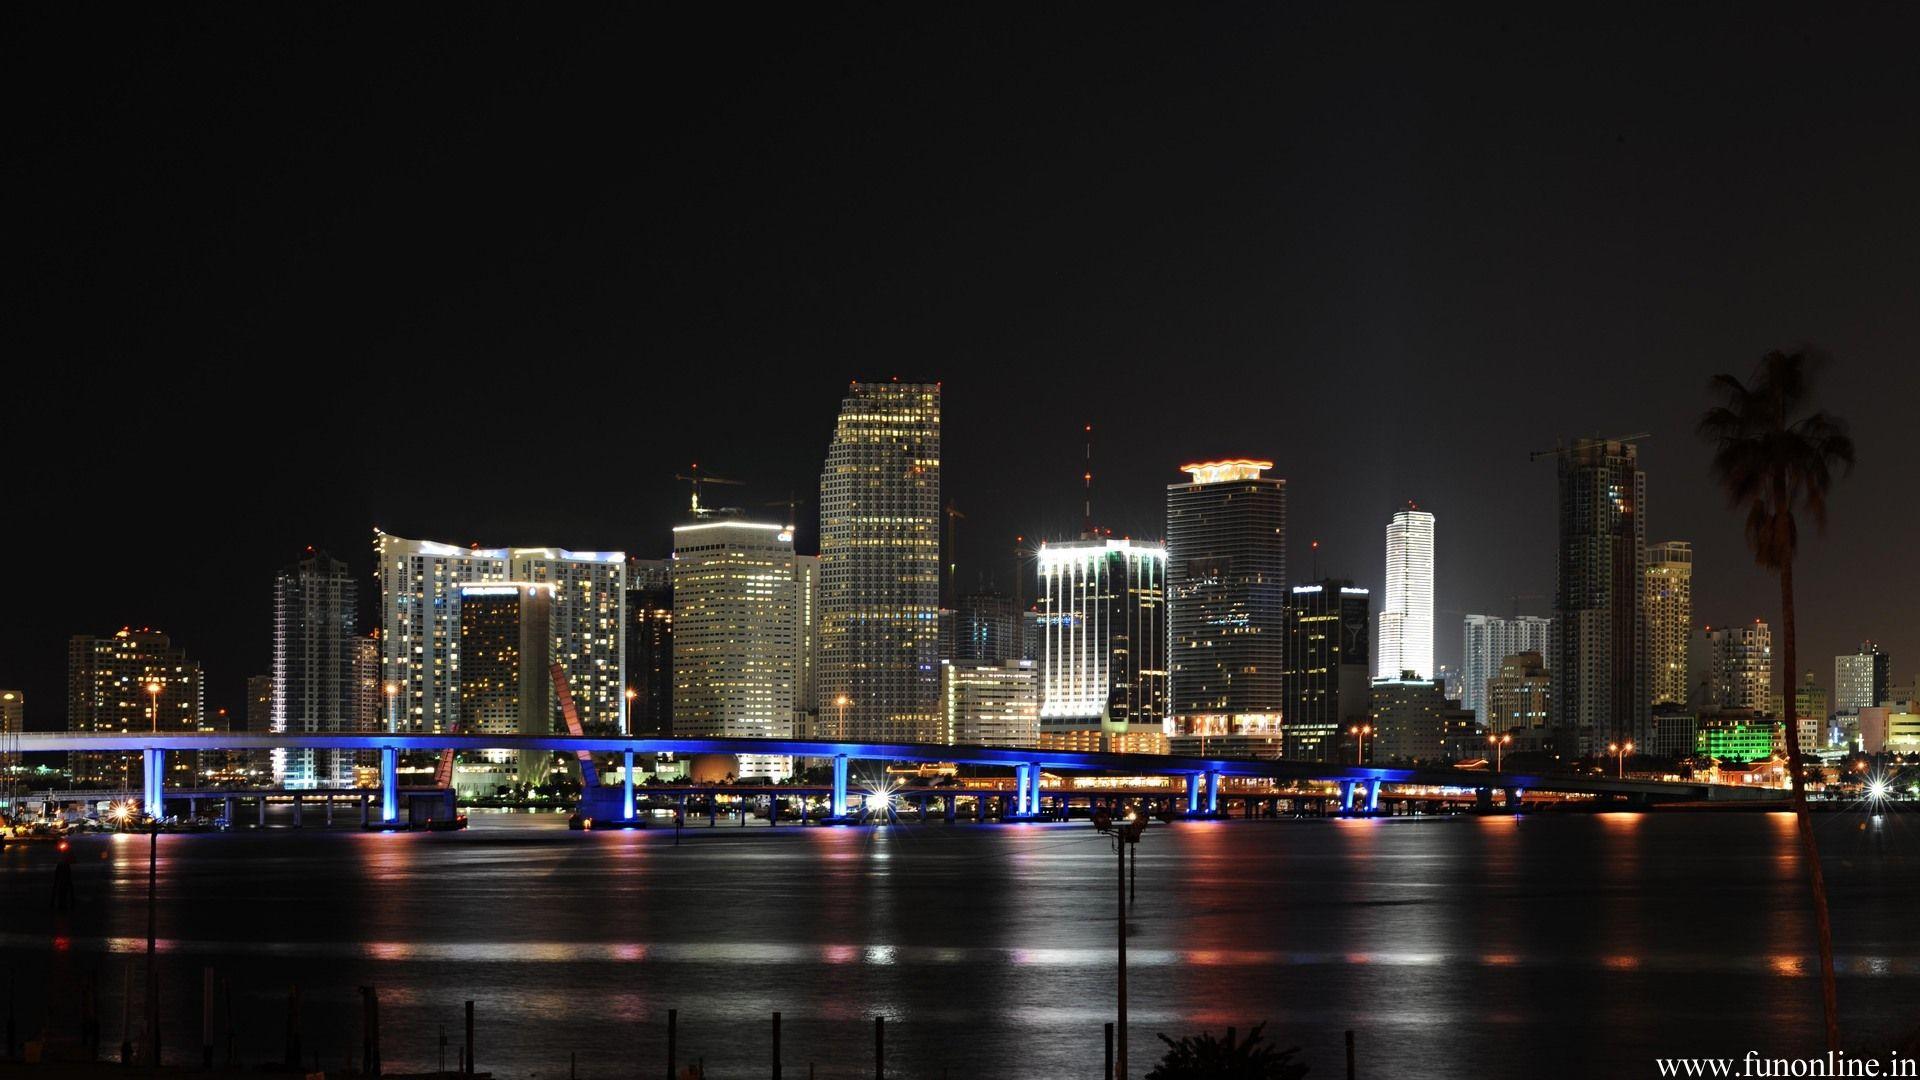 FCU:57 Wallpaper, HD Quality Awesome Miami Photo Collection